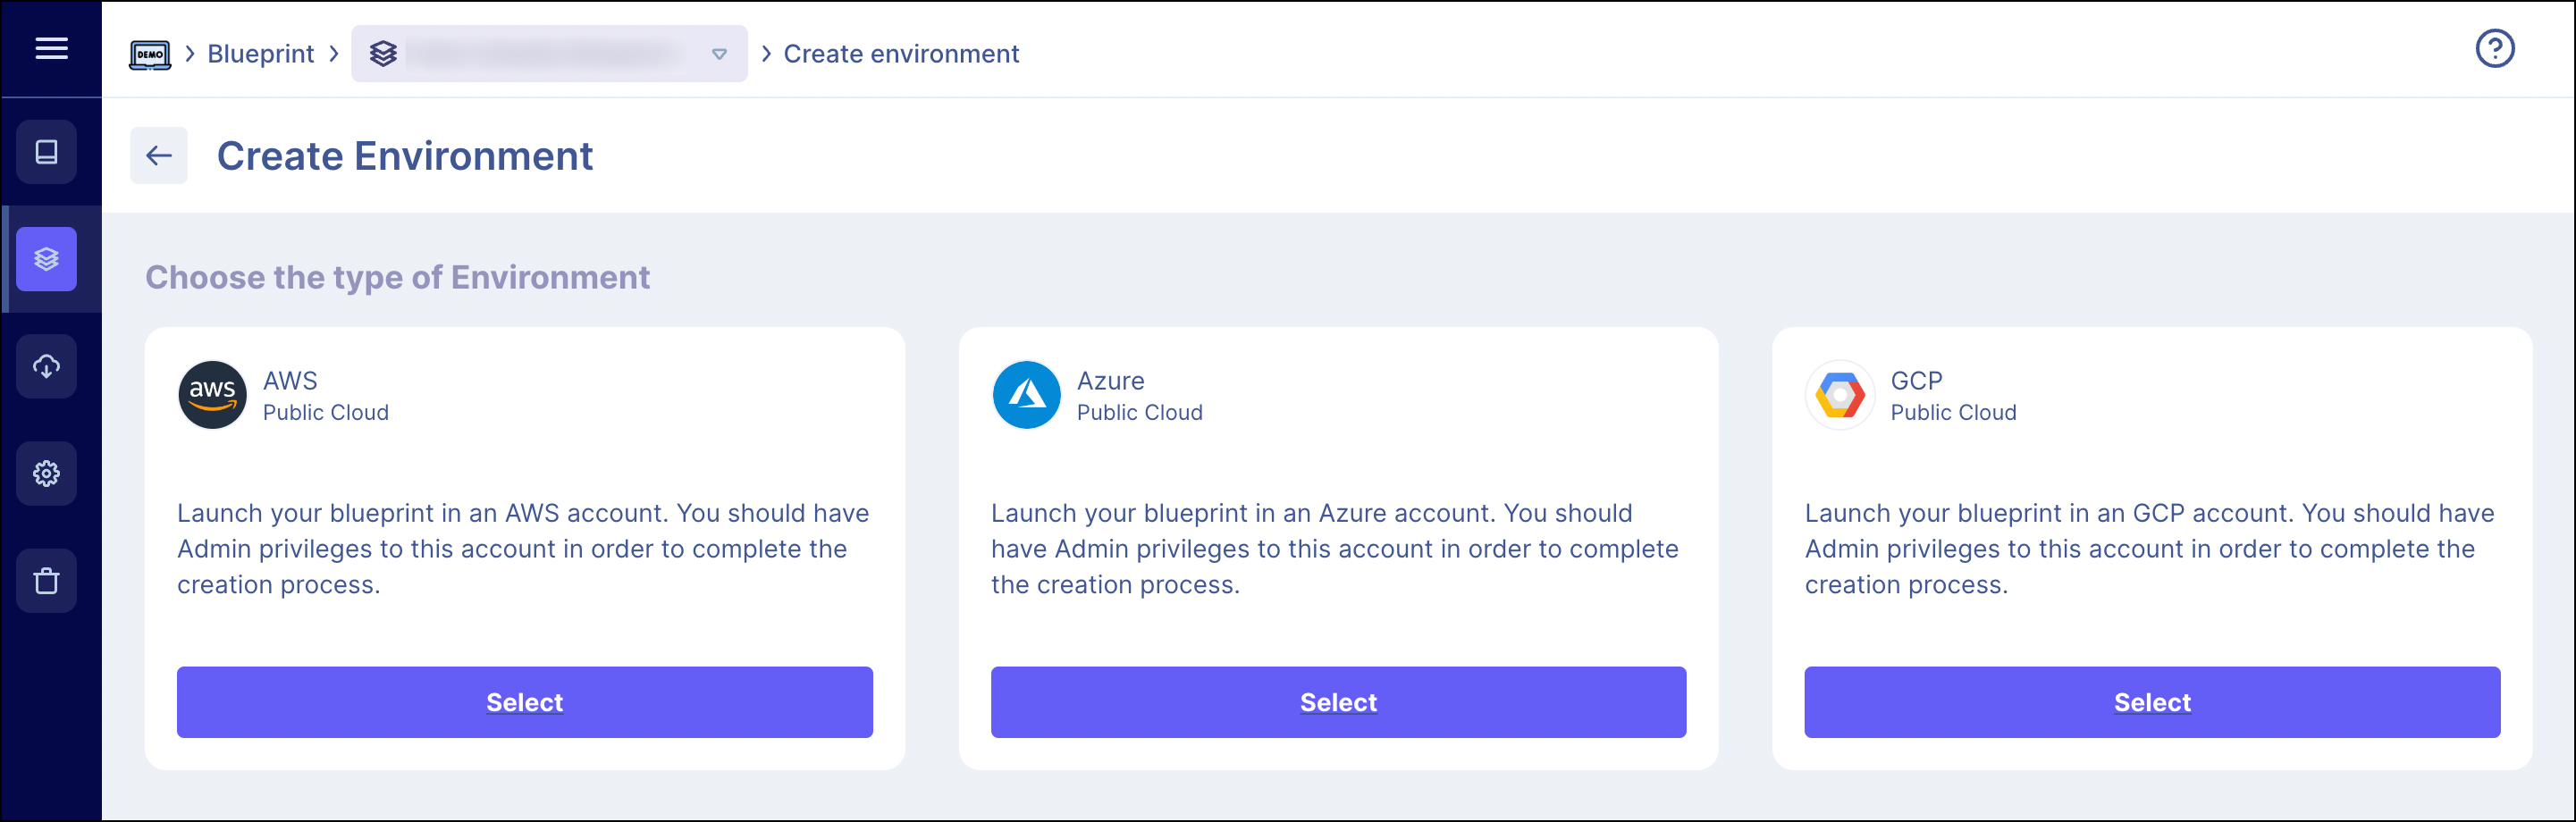 Select the Cloud Provider